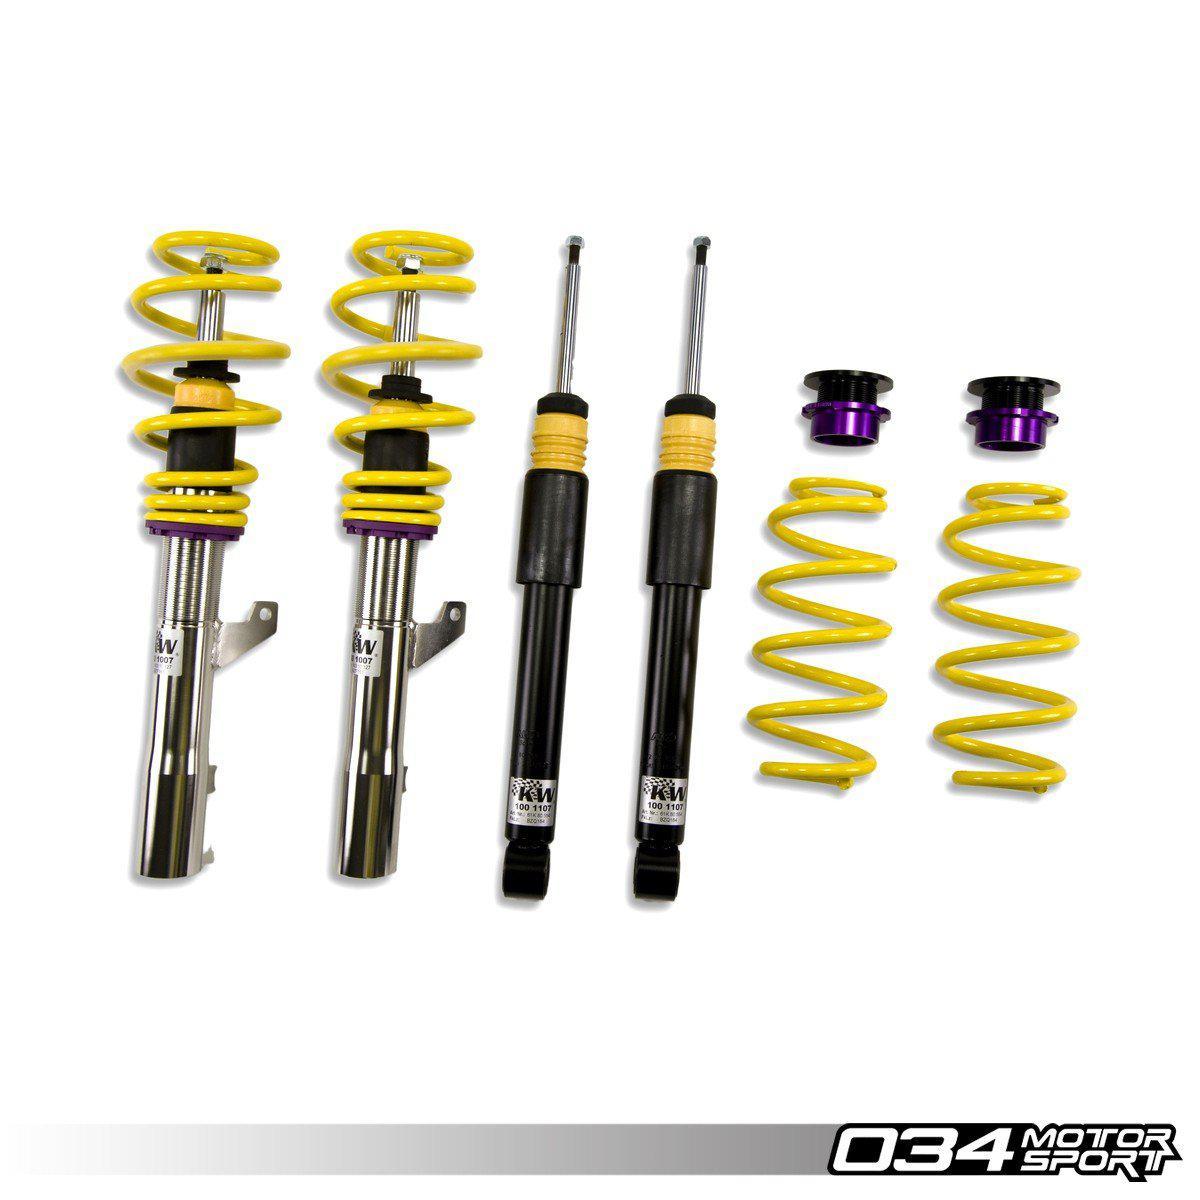 KW Variant 3 Coilover Suspension, MKVII Volkswagen GTI/Golf R Without Dcc-A Little Tuning Co